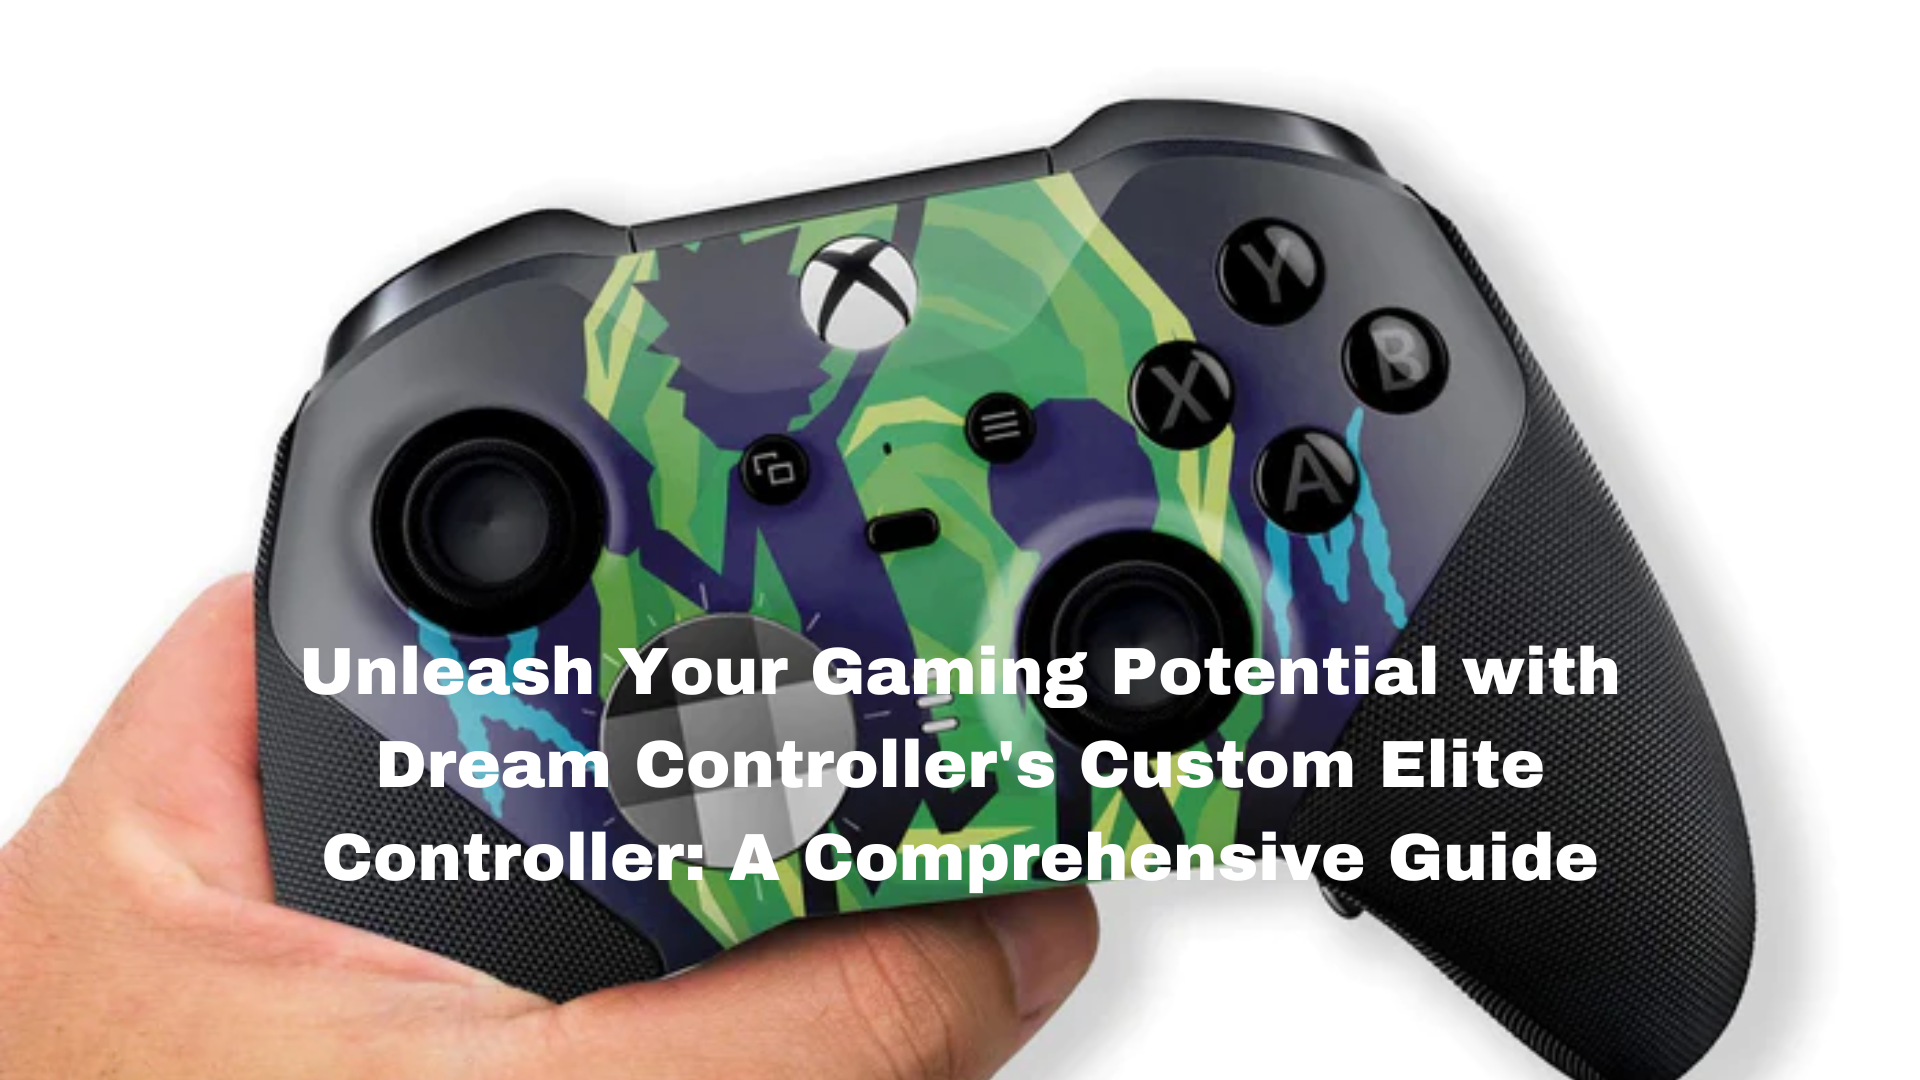 Unleash Your Gaming Potential with Dream Controller's Custom Elite Controller: A Comprehensive Guide